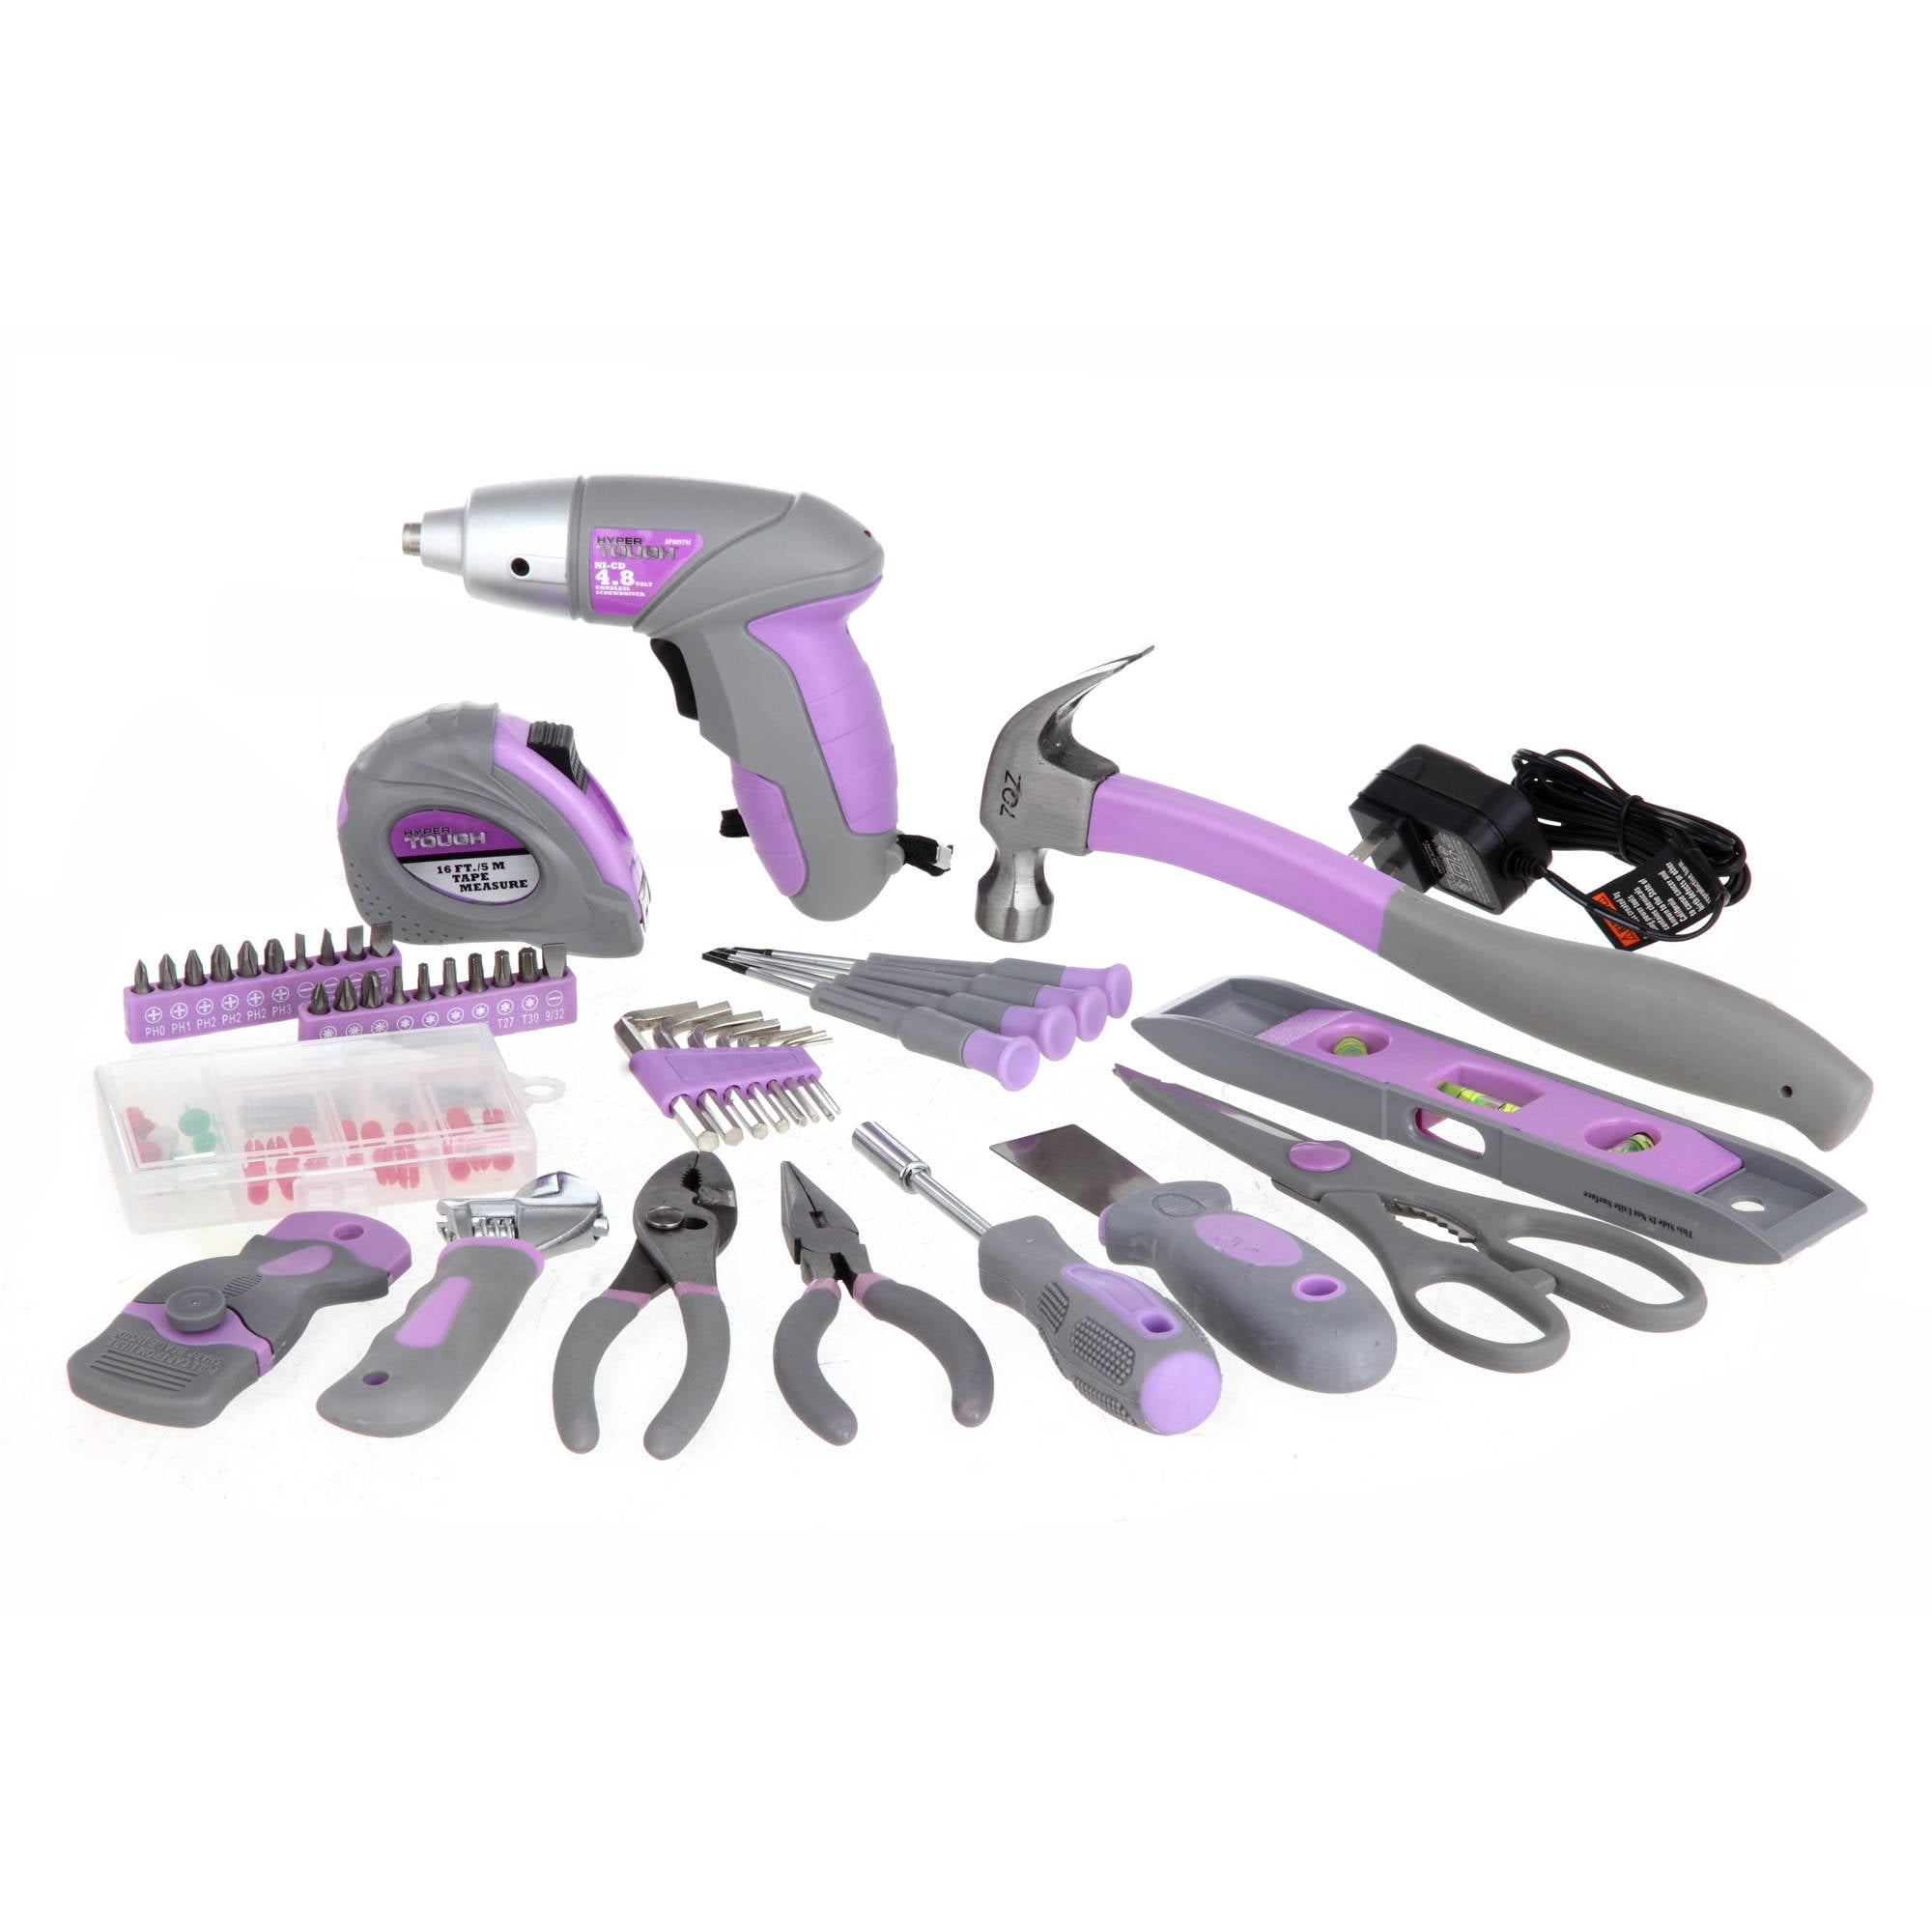 Review for Lady Craft 44-Piece Home Repair Tool Kit with Ergonomic